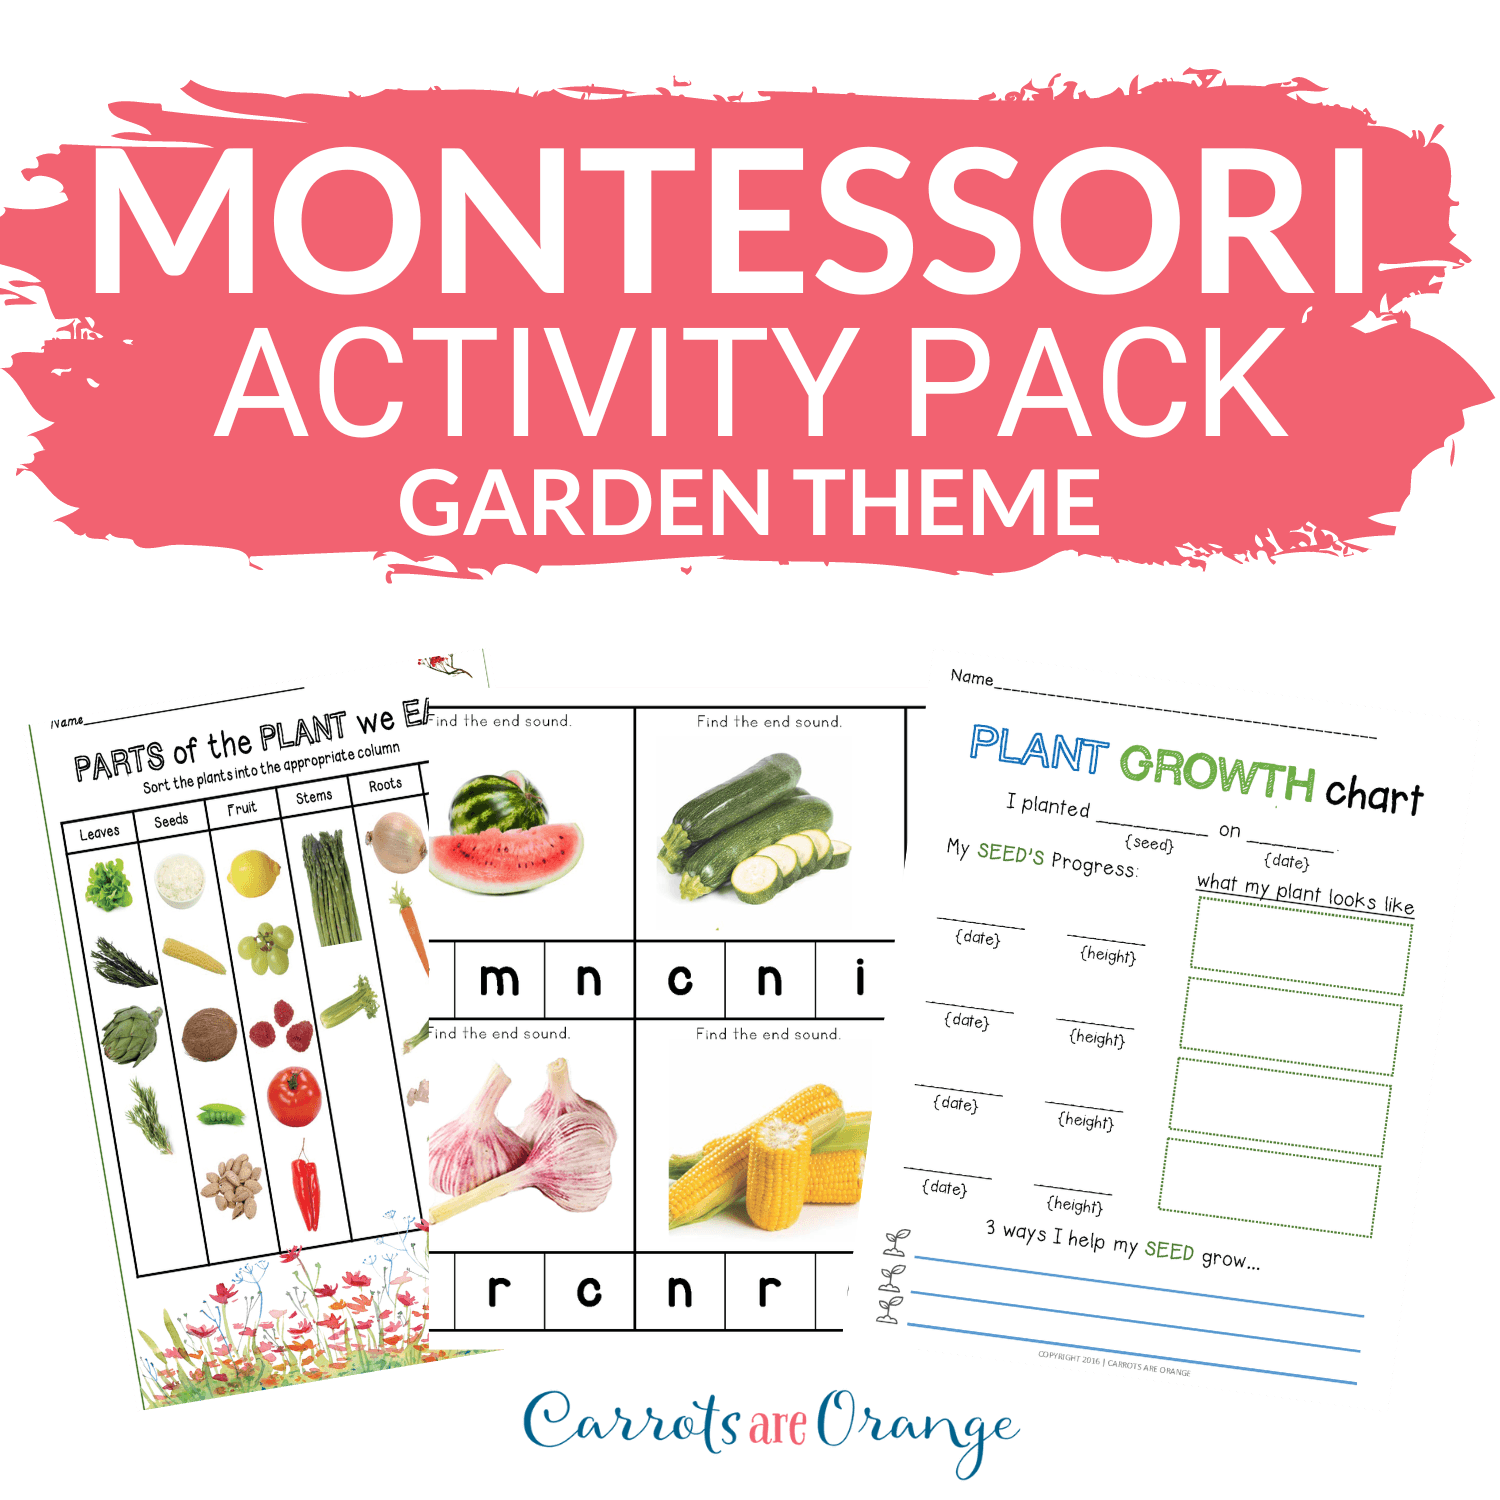 [Activities Pack] Garden Theme - Printables by Carrots Are Orange